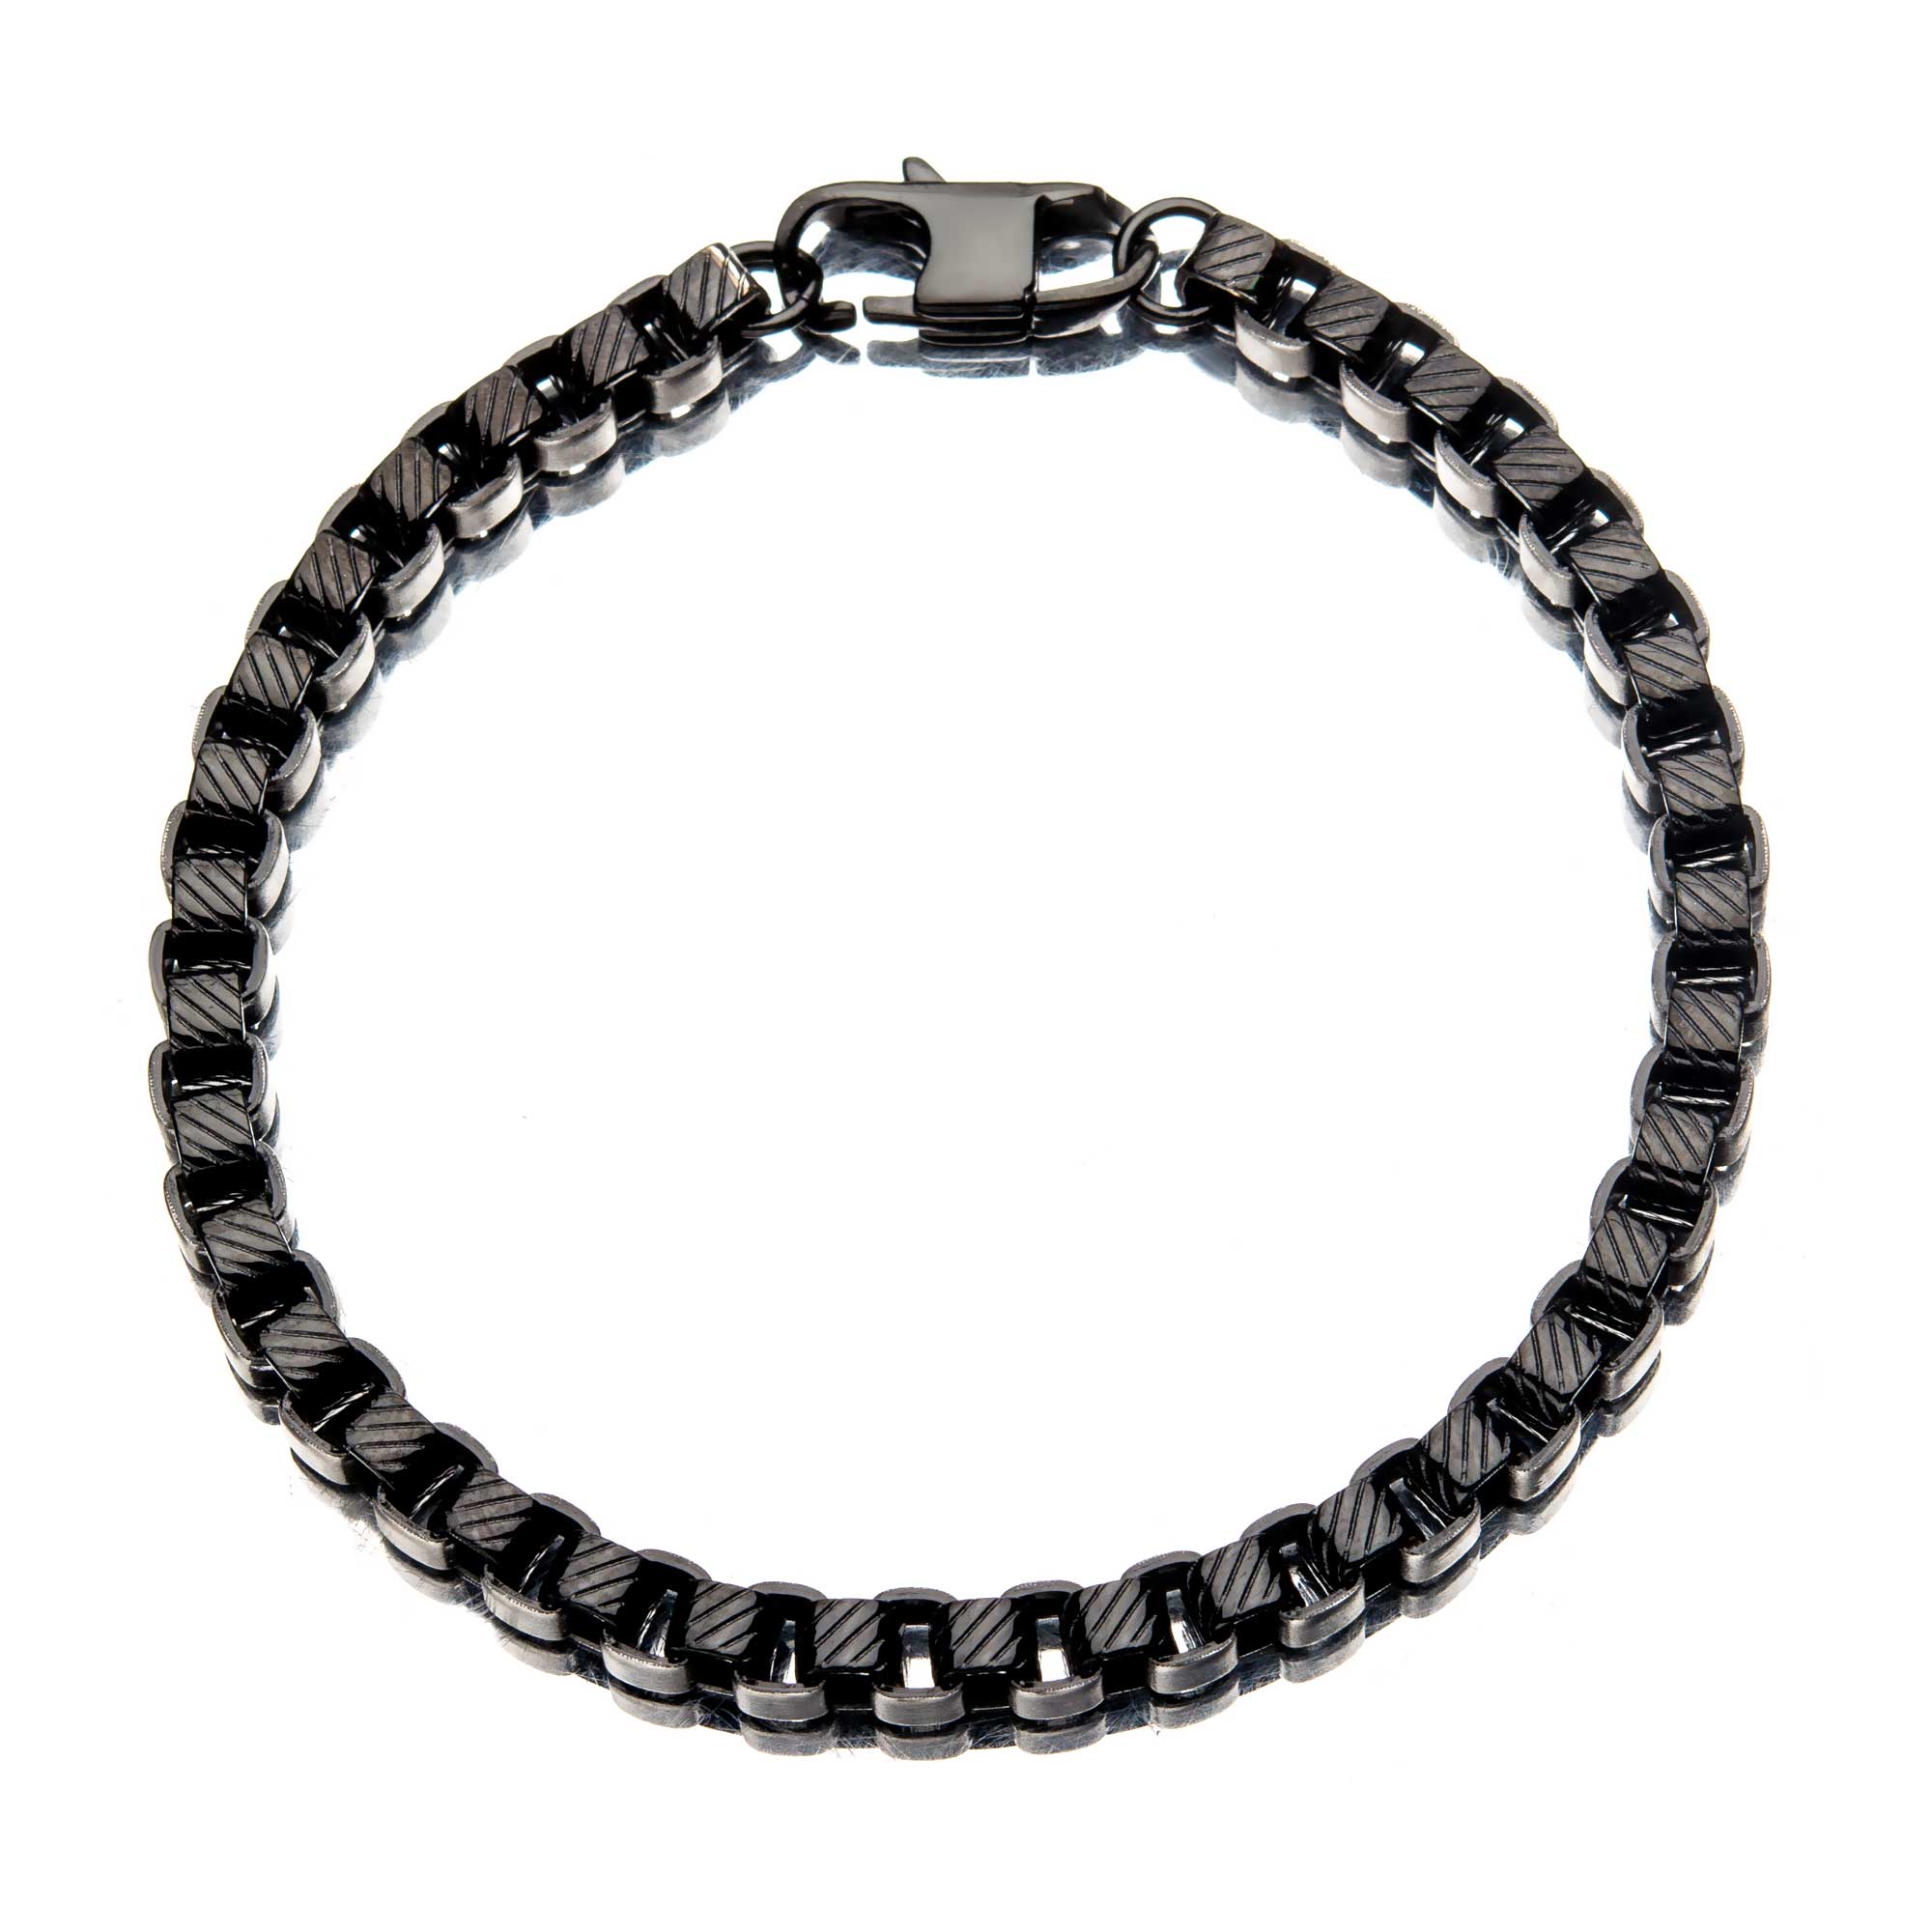 Stainless Steel Black Plated 5.5mm Round Box Chain with Lobster Clasp Image 2 Ken Walker Jewelers Gig Harbor, WA